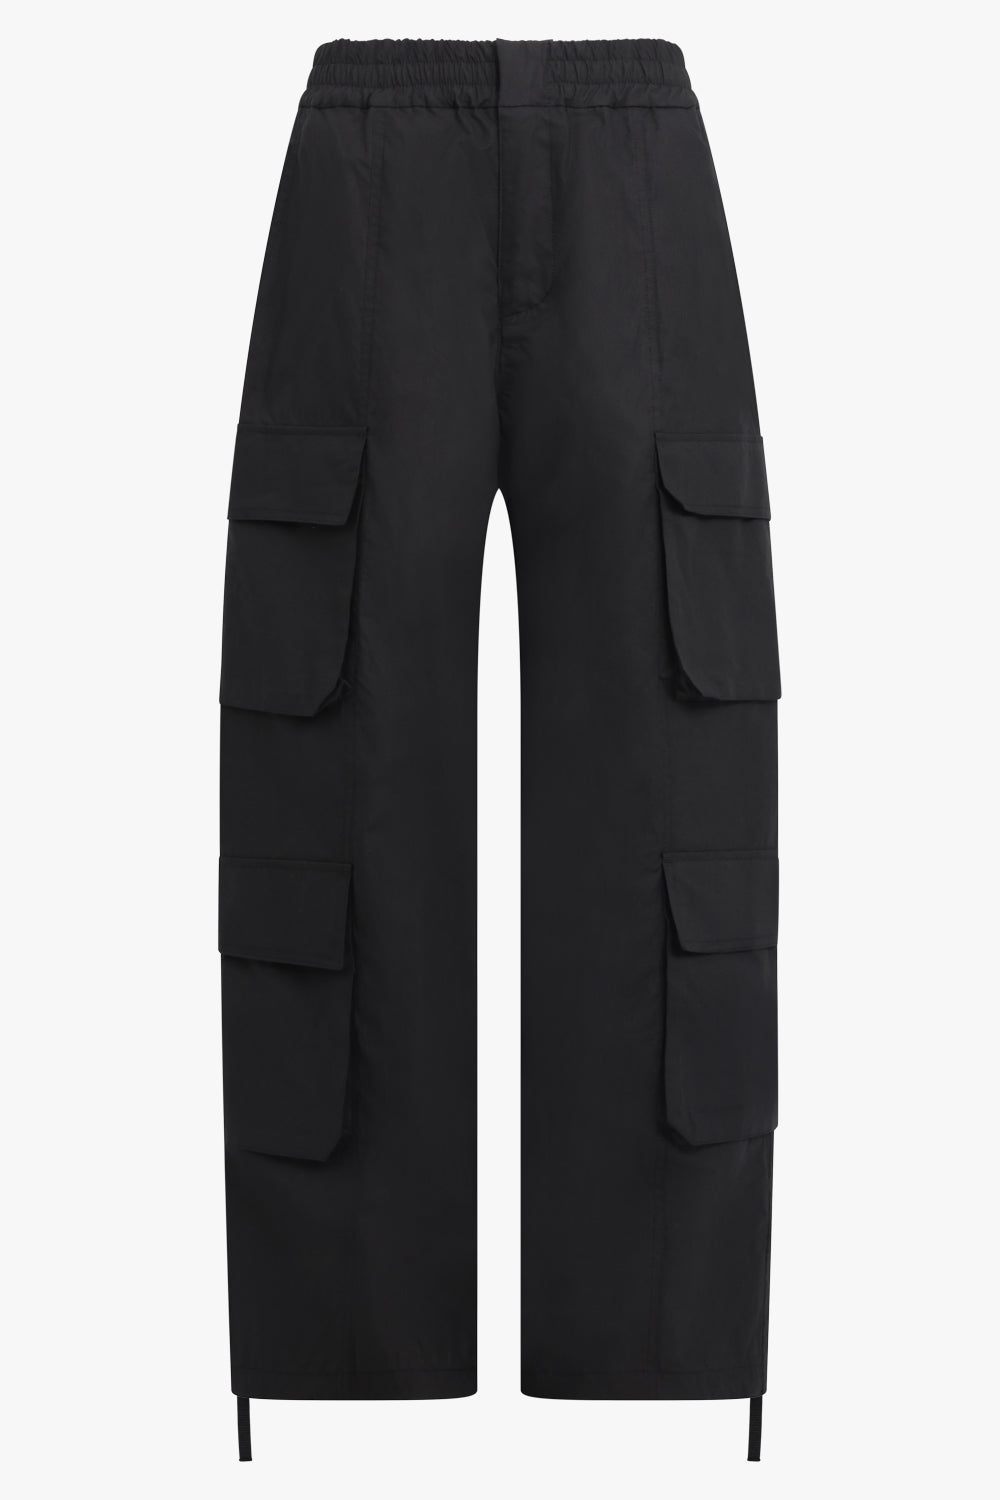 AFTER PRAY Unclassified RELAXED UTILITY QUATRO CARGO PANTS | BLACK